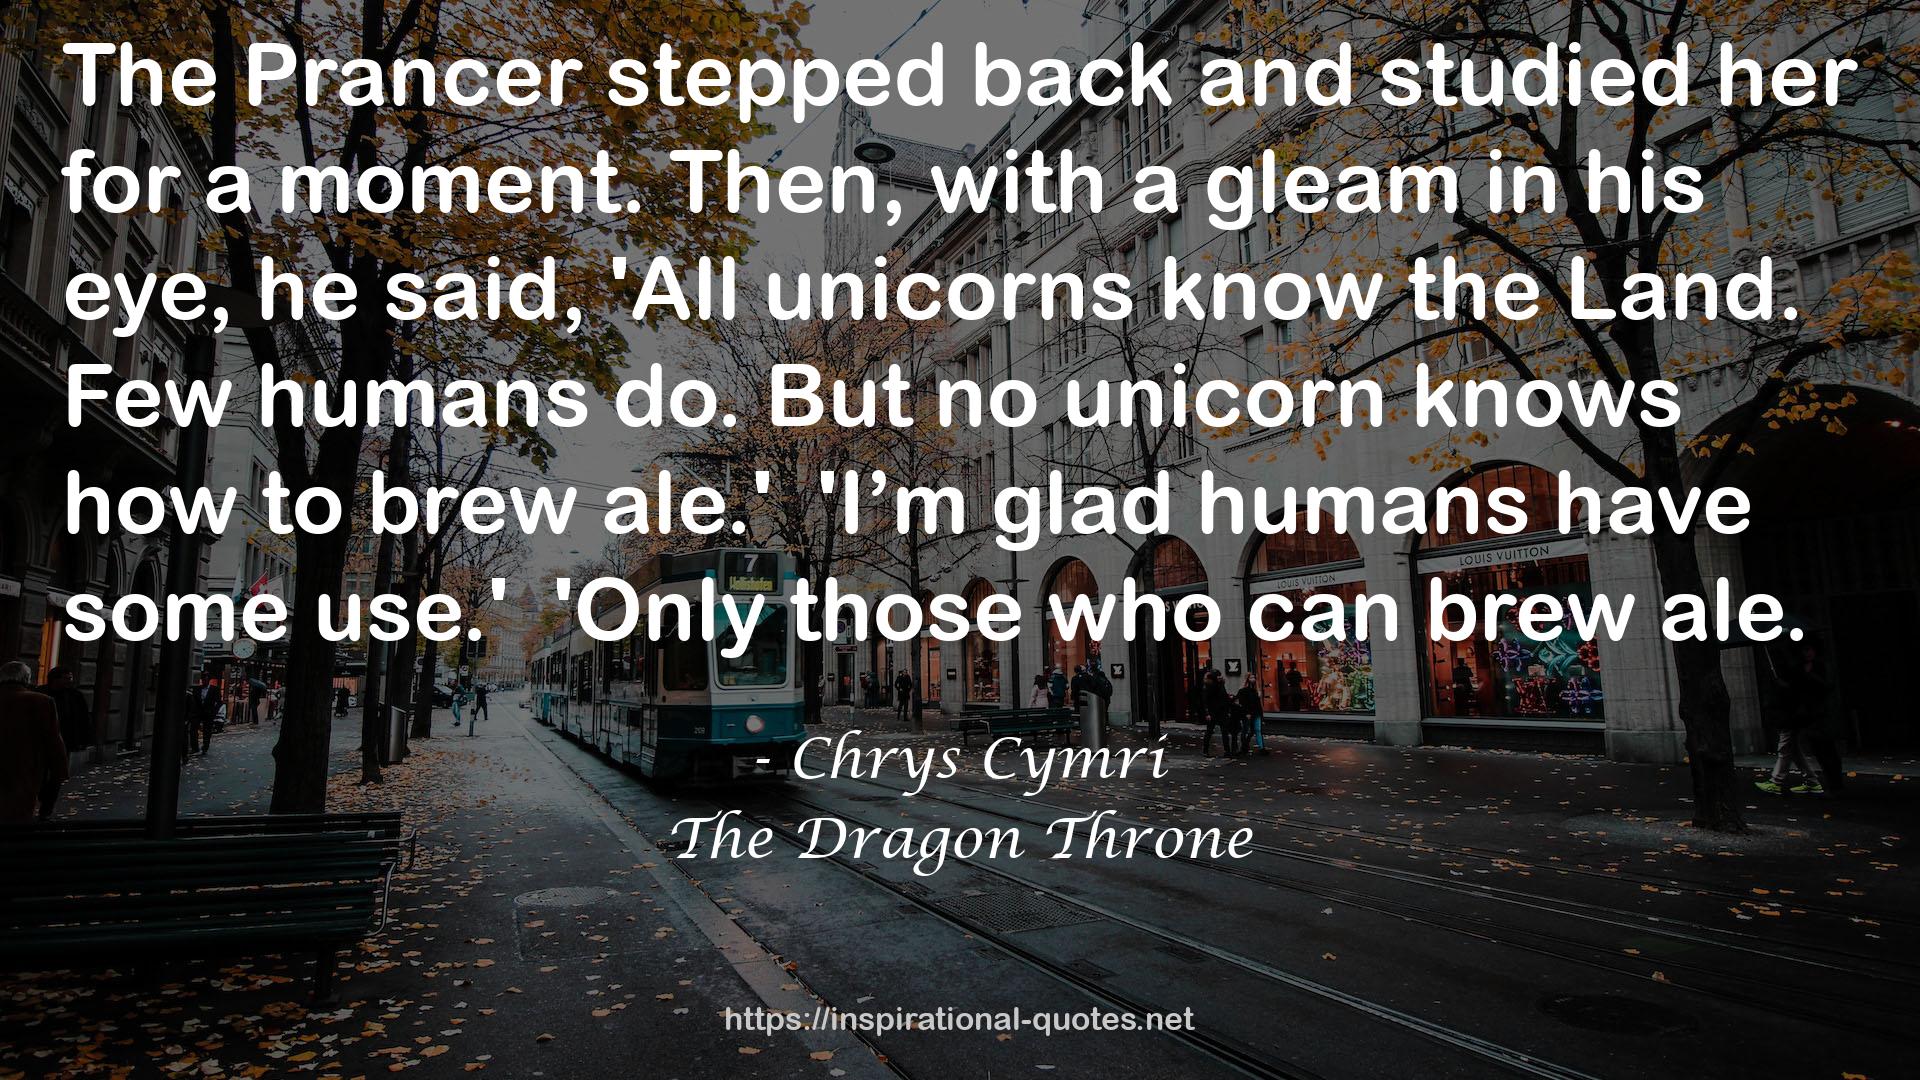 The Dragon Throne QUOTES